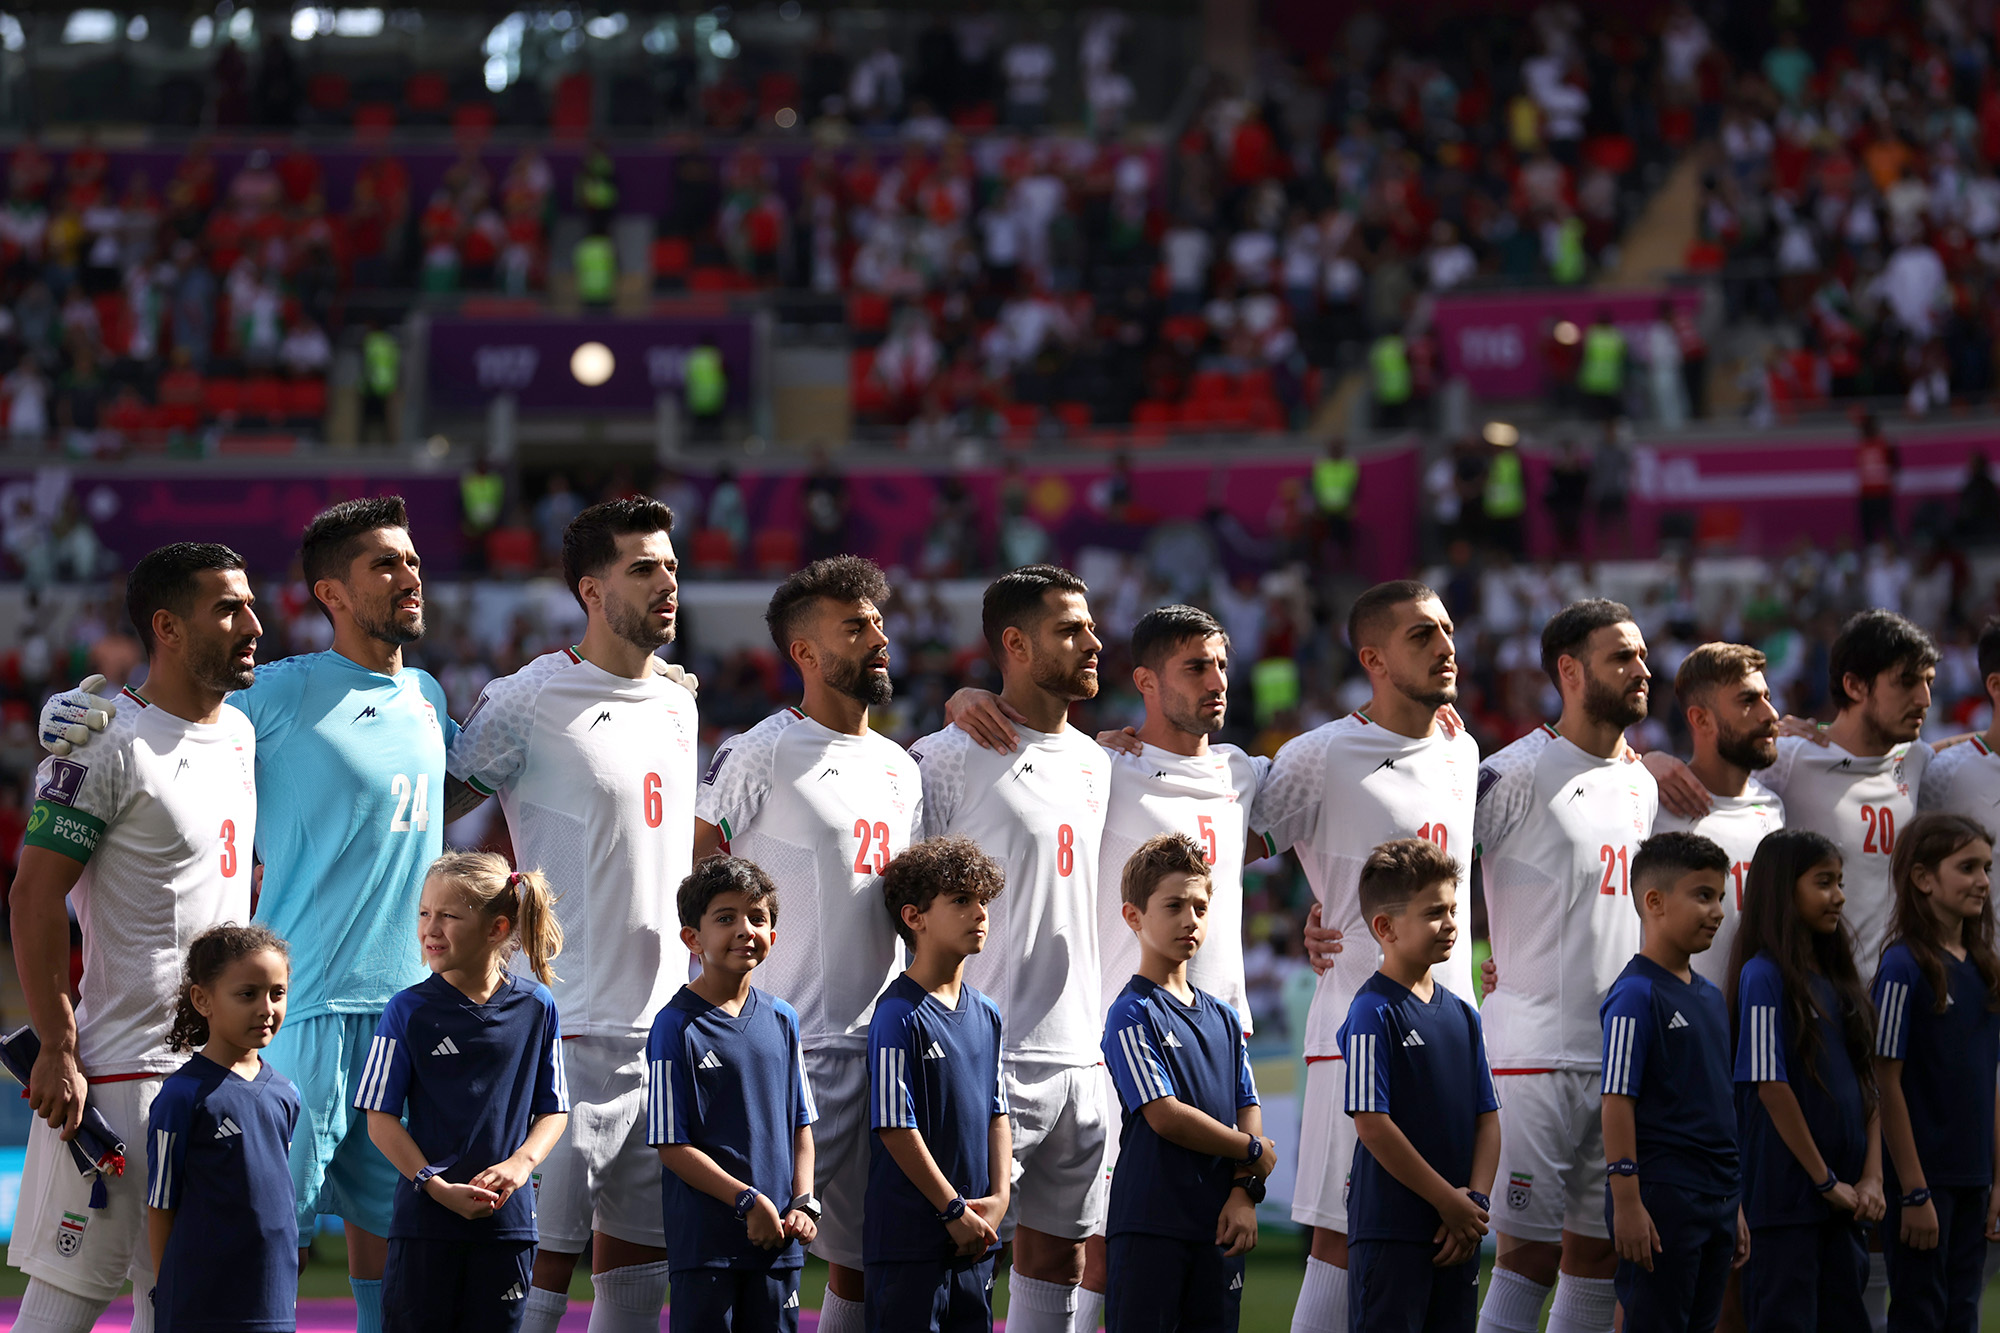 Iran players line up for the national anthem prior to the FIFA World Cup Qatar 2022 Group B match between Wales and IR Iran at Ahmad Bin Ali Stadium on November 25.